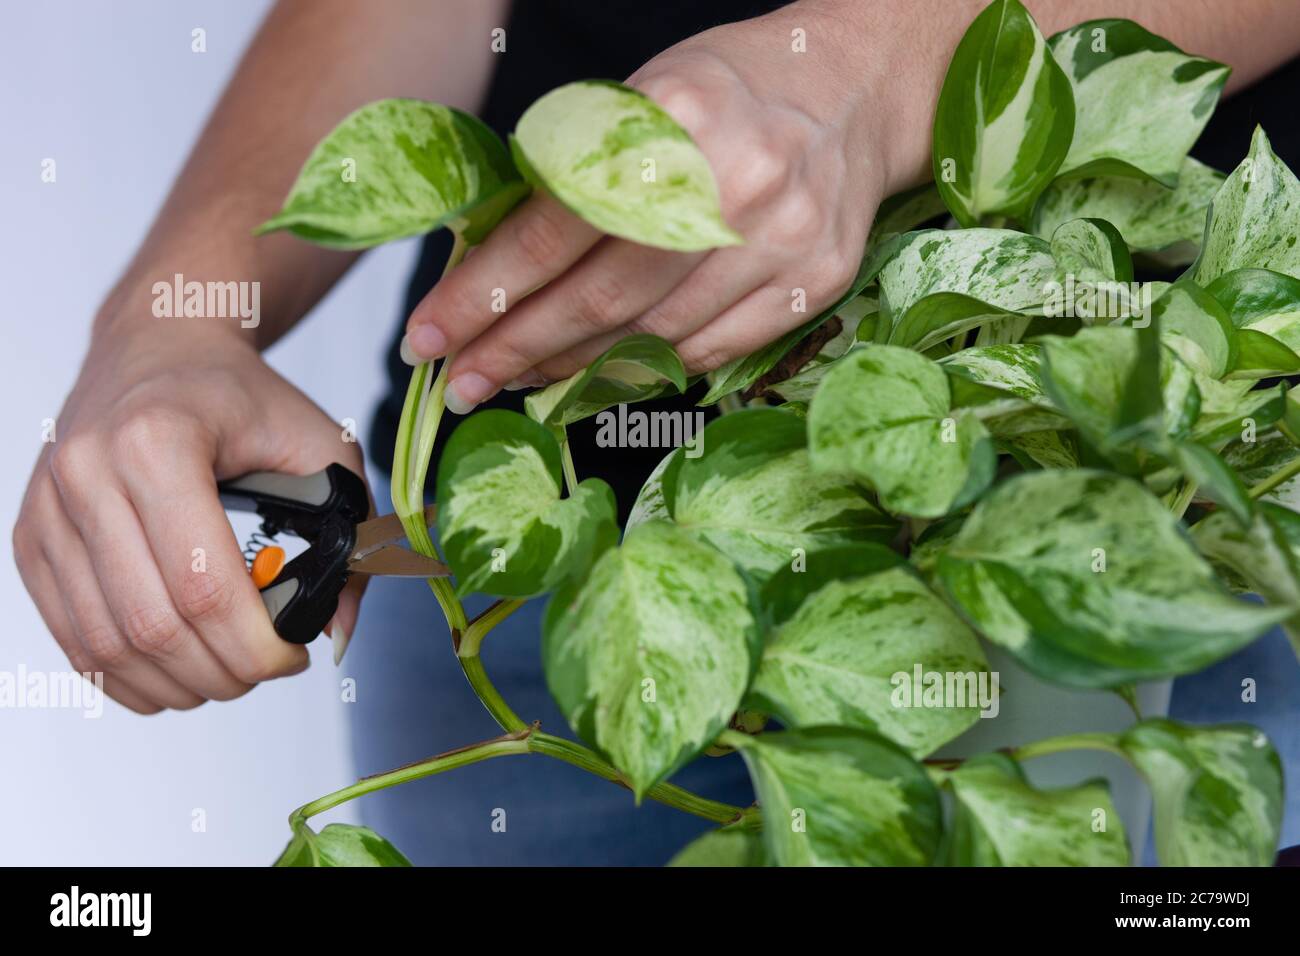 woman hands clipping pothos plant Stock Photo